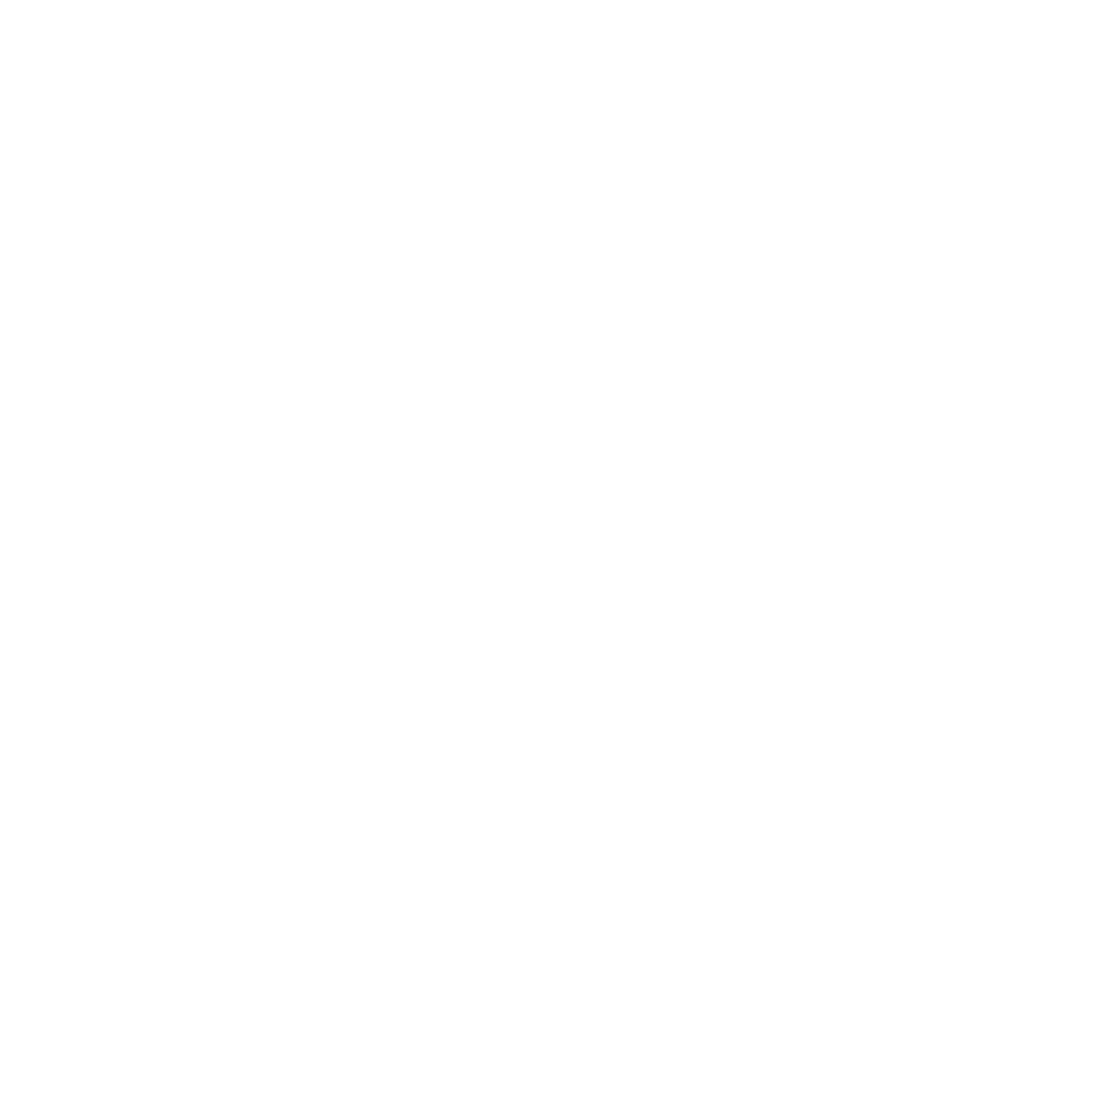 A treble clef to the left of the text, "Berkshire Choral International"